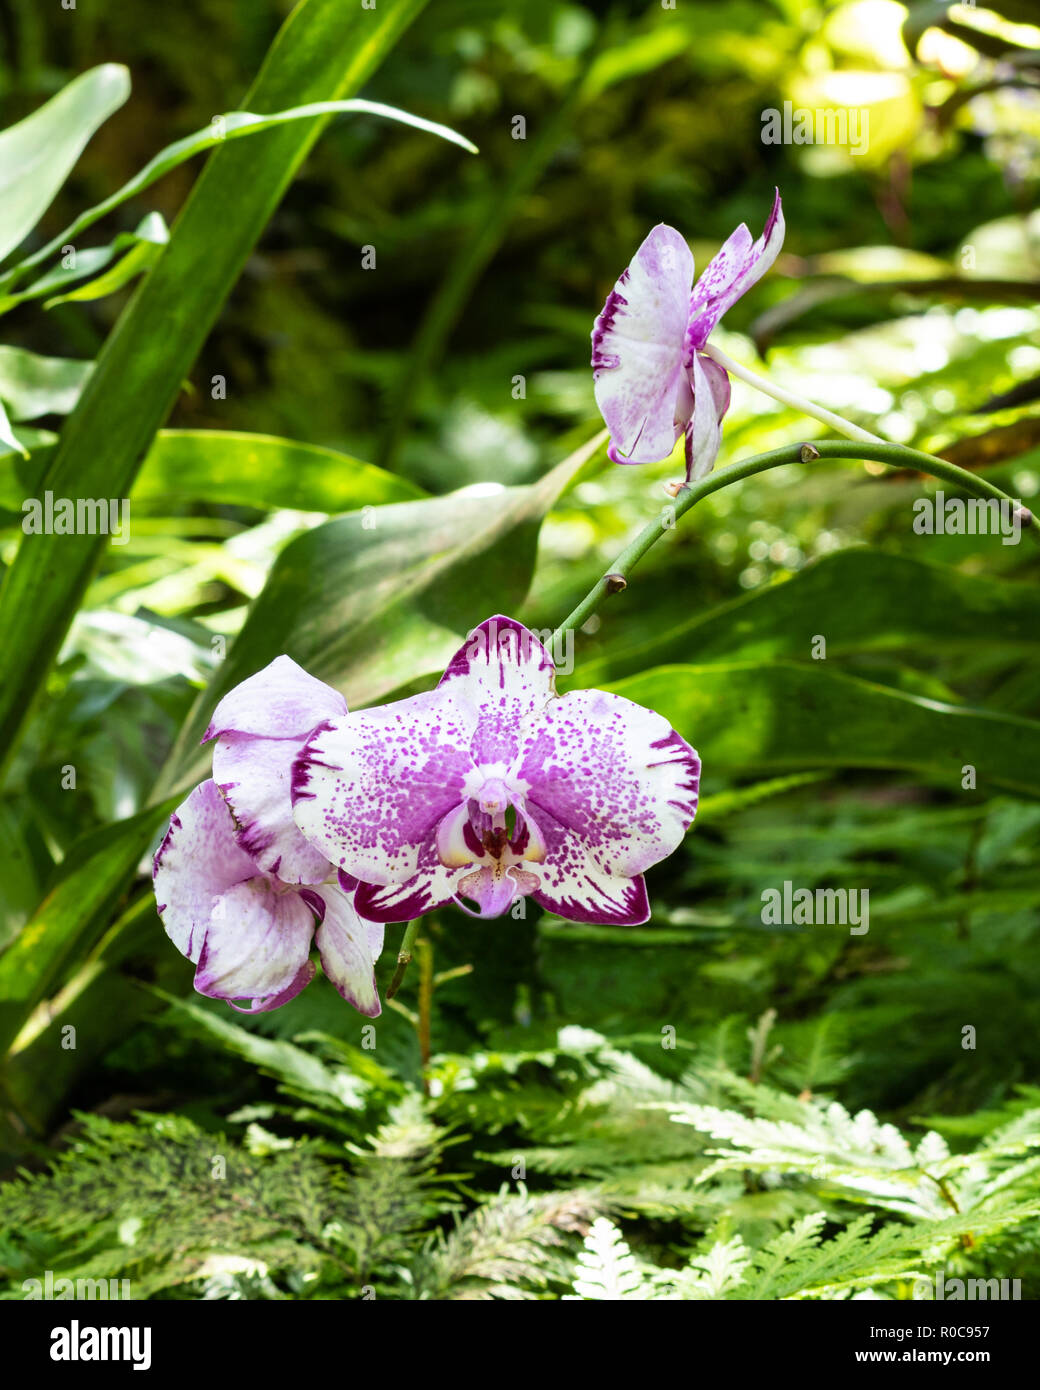 Bunch of phalaenopsis (moth shaped) orchids at Botanical garden in Hilo, Hawaii. White petals with purple accents and pink speckles; ferns and green l Stock Photo